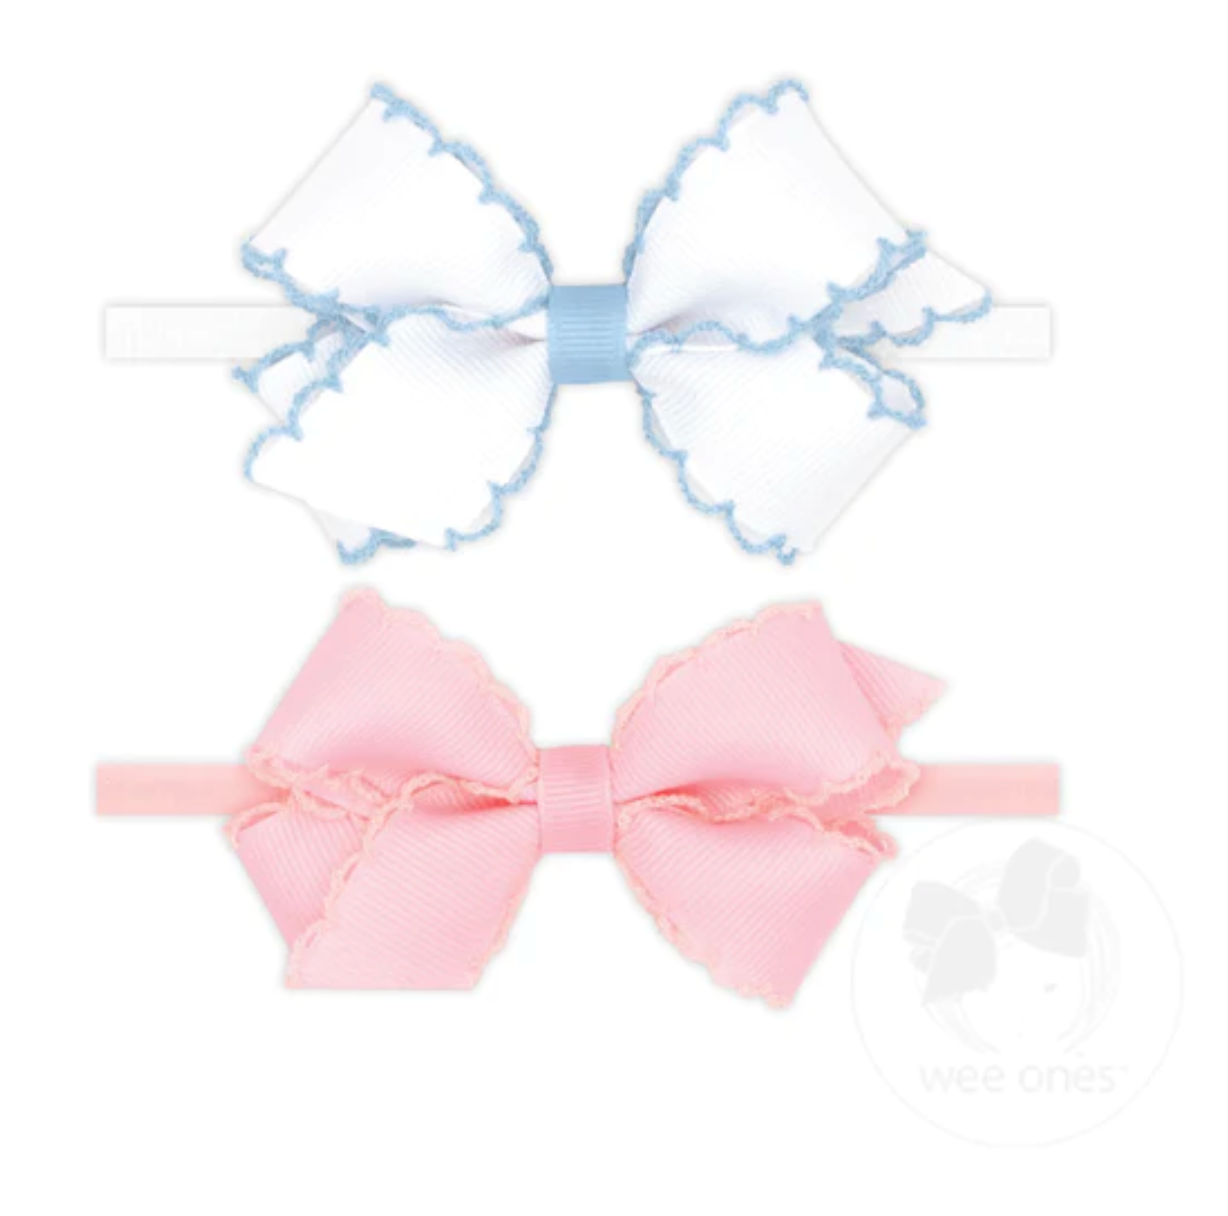 Wee Ones Mini Grosgrain Bows with Moonstitch Edge on Skinny Nylon Band - Blue/White